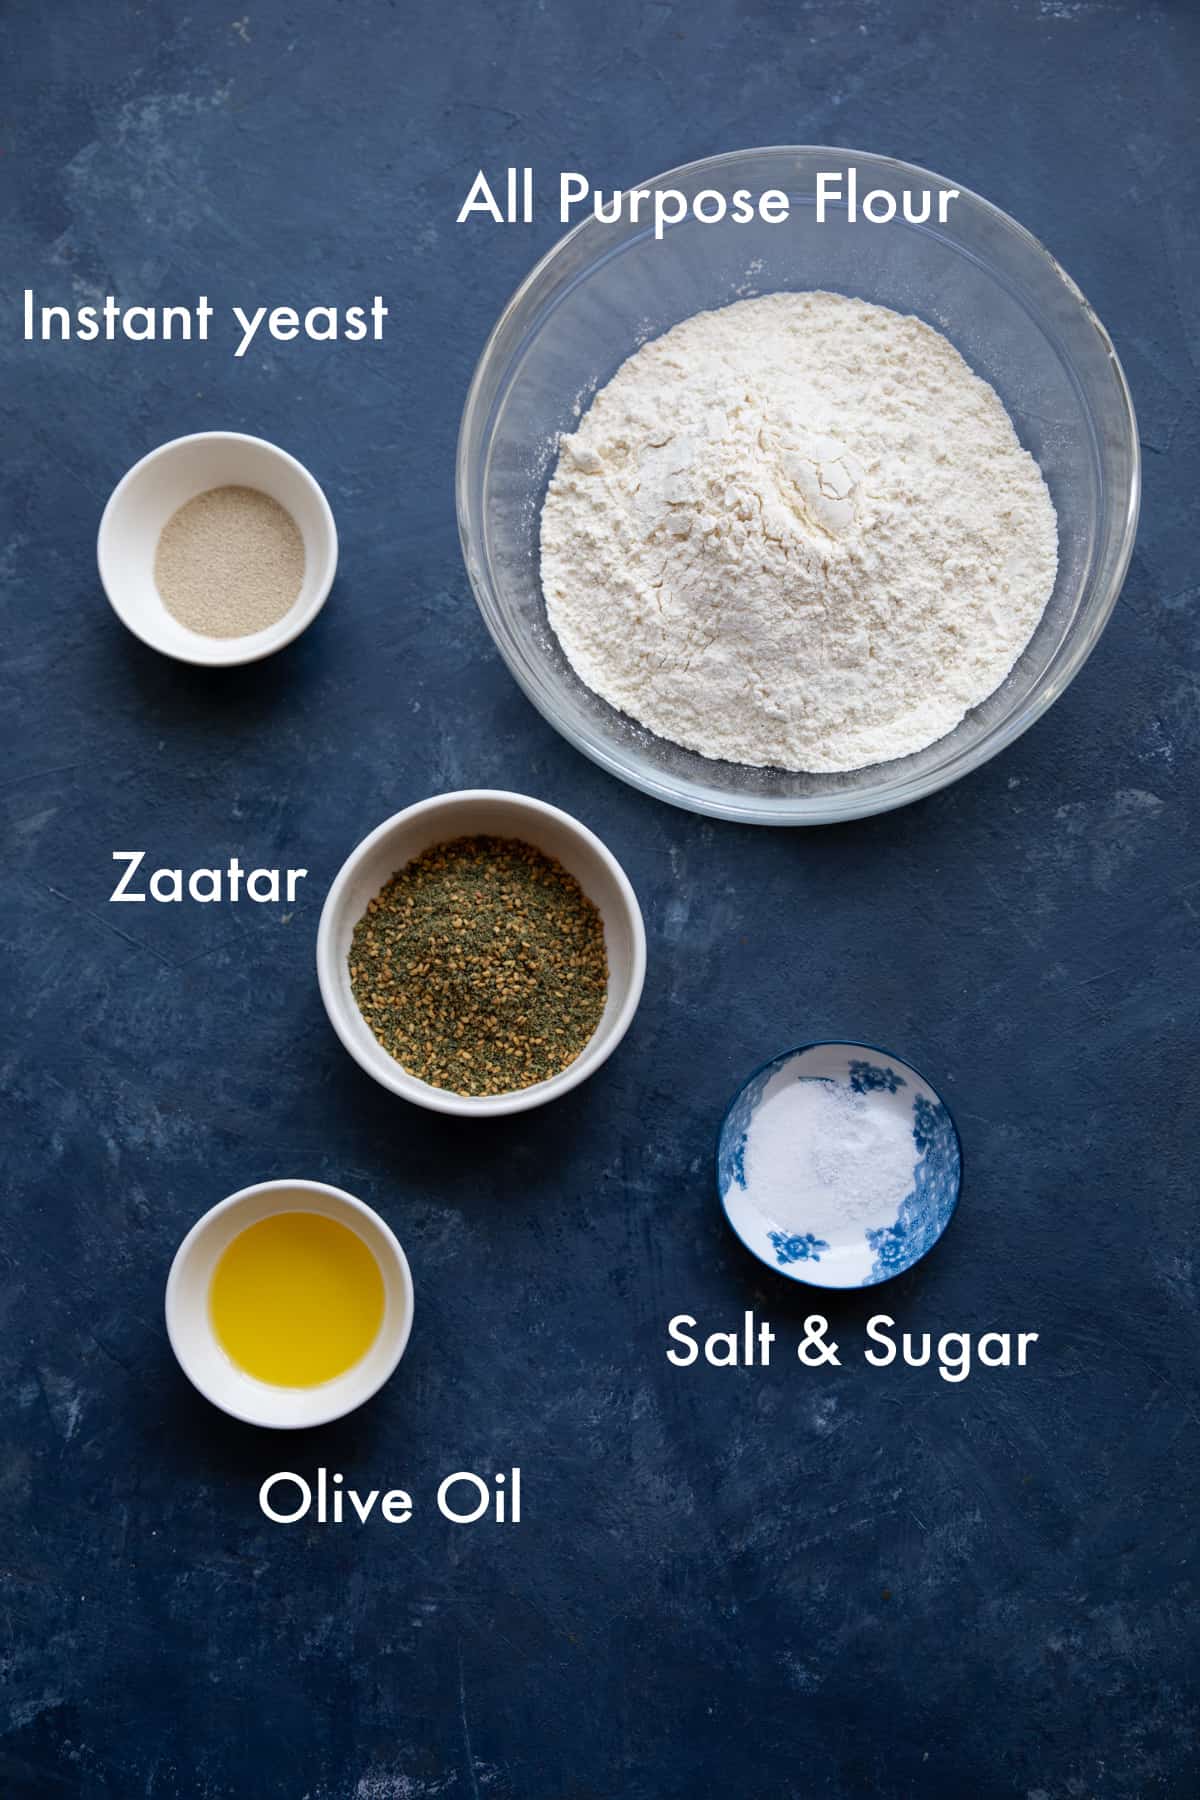 to make this recipe you need flour, salt, sugar, water, olive oil and zaatar.